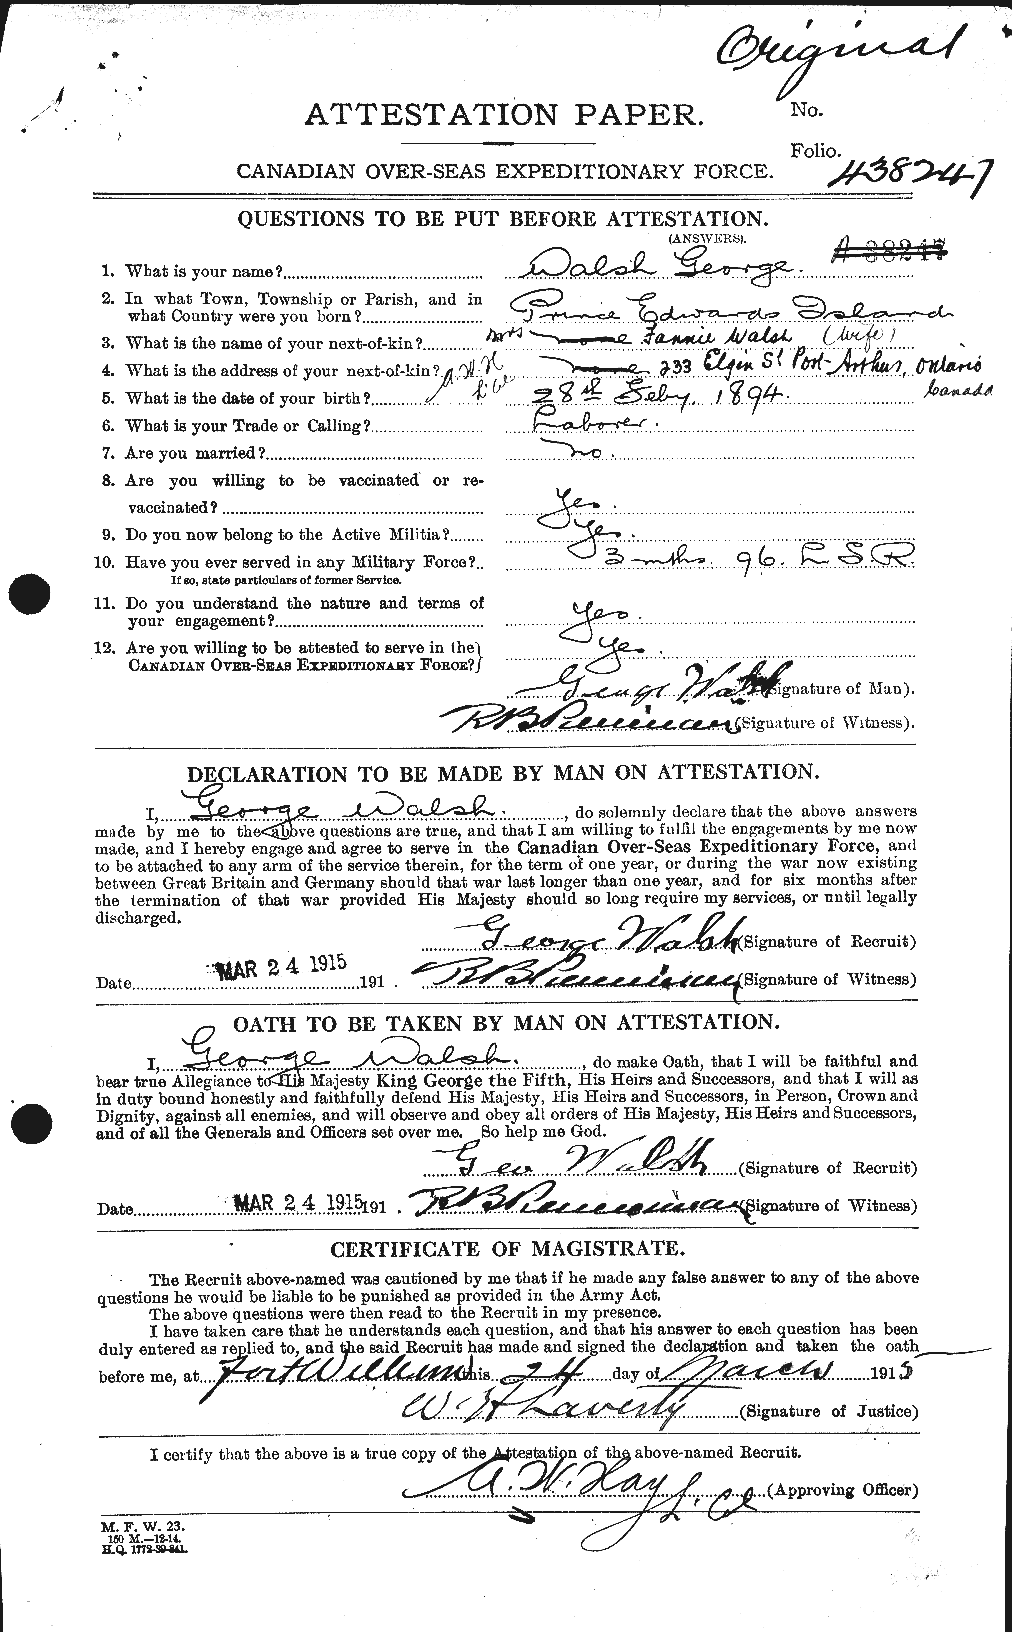 Personnel Records of the First World War - CEF 653218a